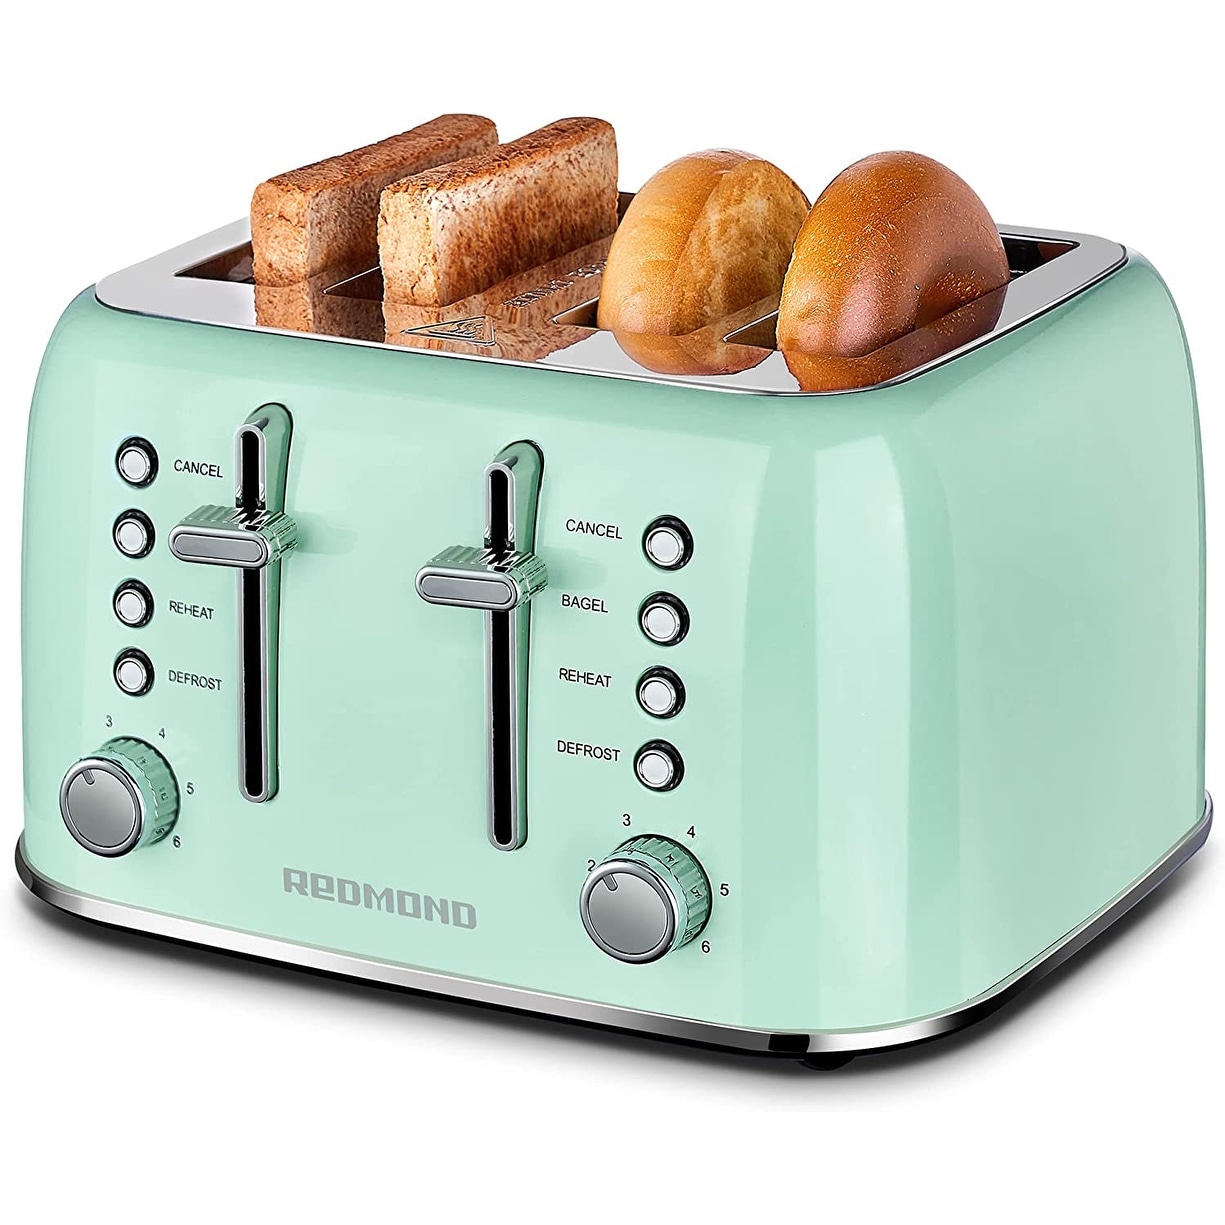 https://ak1.ostkcdn.com/images/products/is/images/direct/f9df50e00eab630525a2433d709d09355ff937a3/Toaster-4-Slice%2C-Retro-Stainless-Steel-Toaster-with-Extra-Wide-Slots-Bagel%2C-Defrost%2C-Reheat-Function.jpg